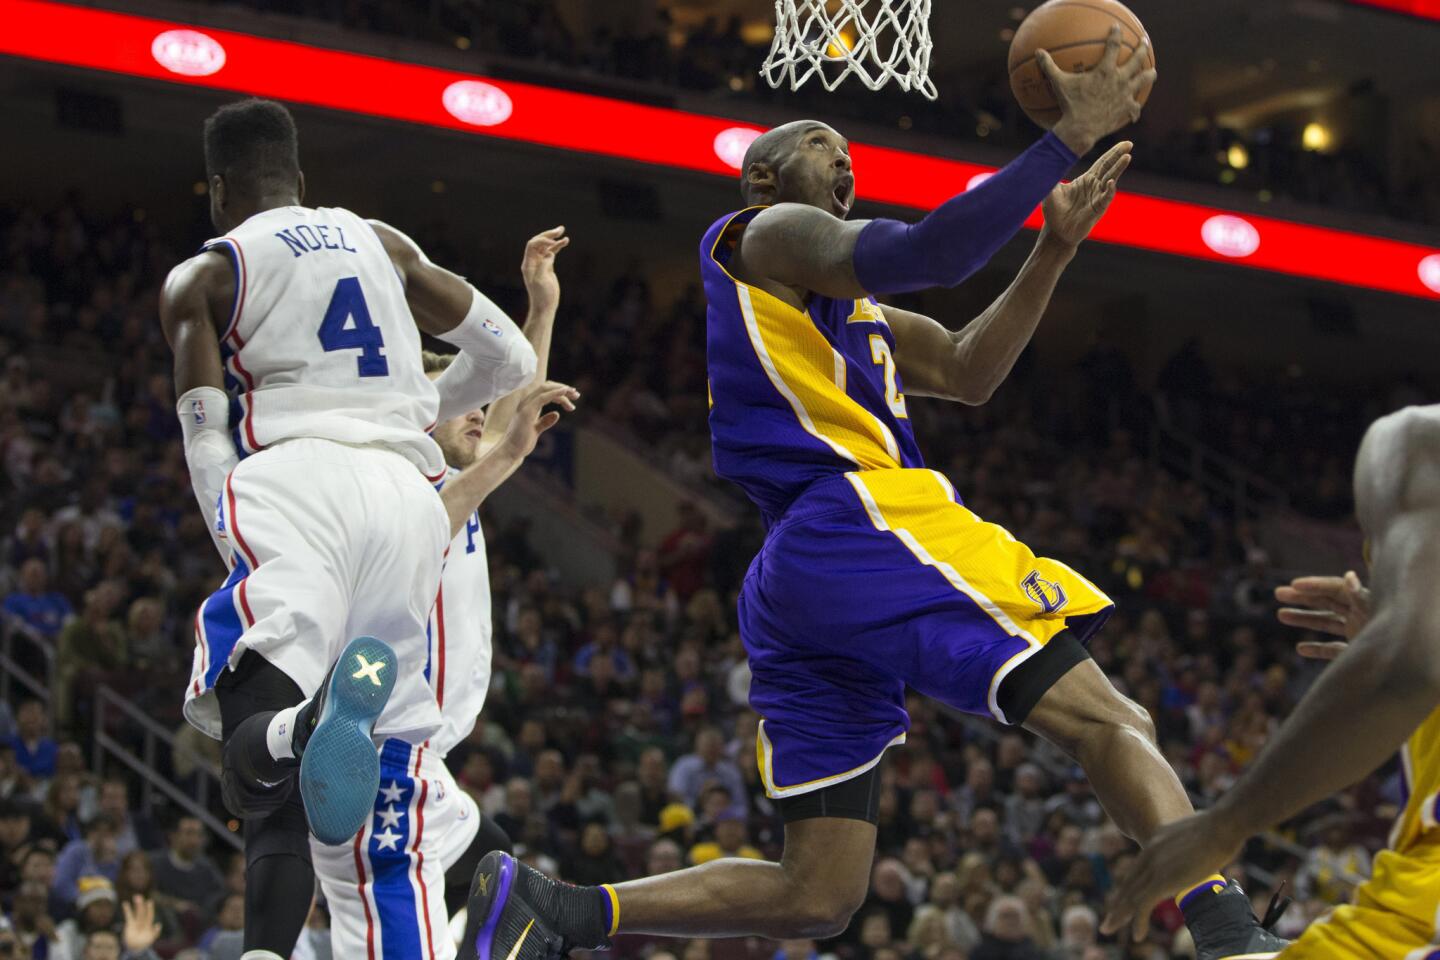 Los Angeles Lakers forward Karl Malone scored 20 points and had six  rebounds during a 98-90 victory over the New York Knicks in an NBA  basketball game at the Staples Center on